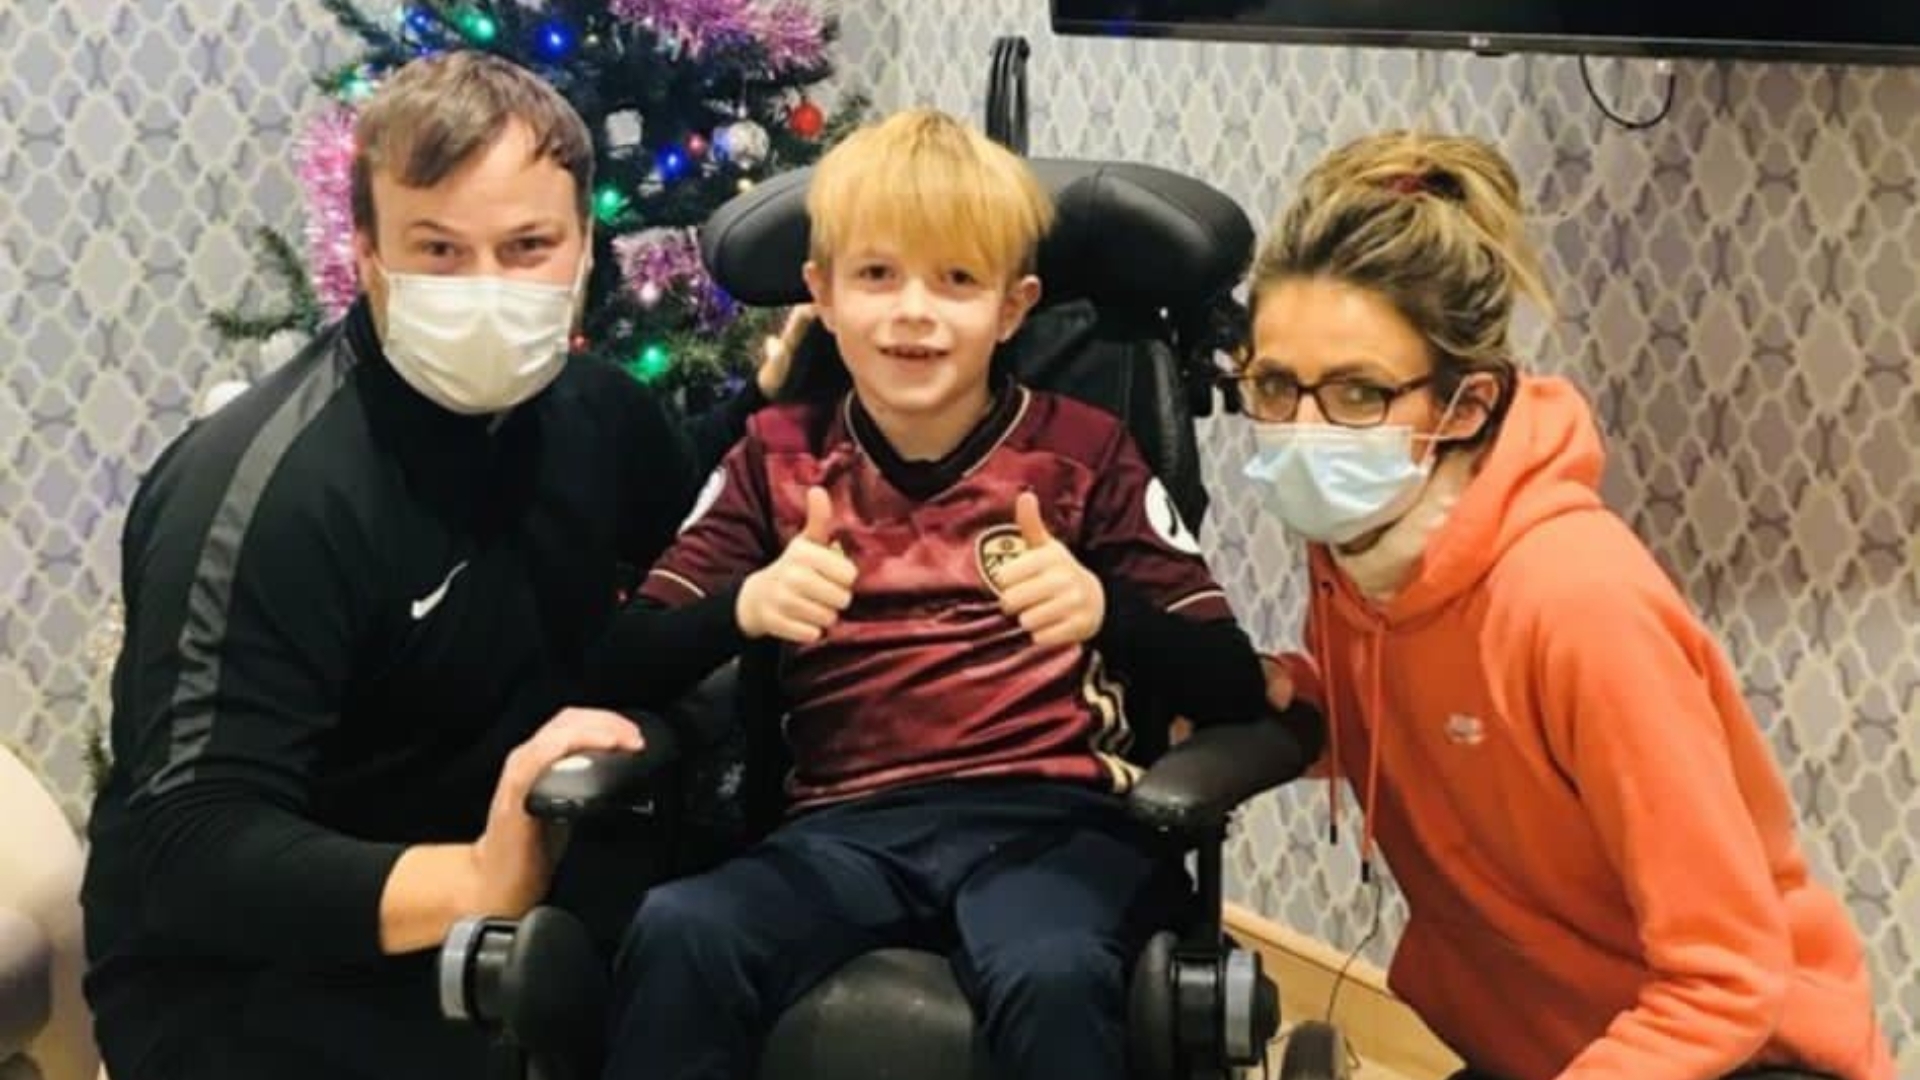 Josh Pollard's family have been fundraising for the Ronald McDonald House which helped them during their time in hospital.